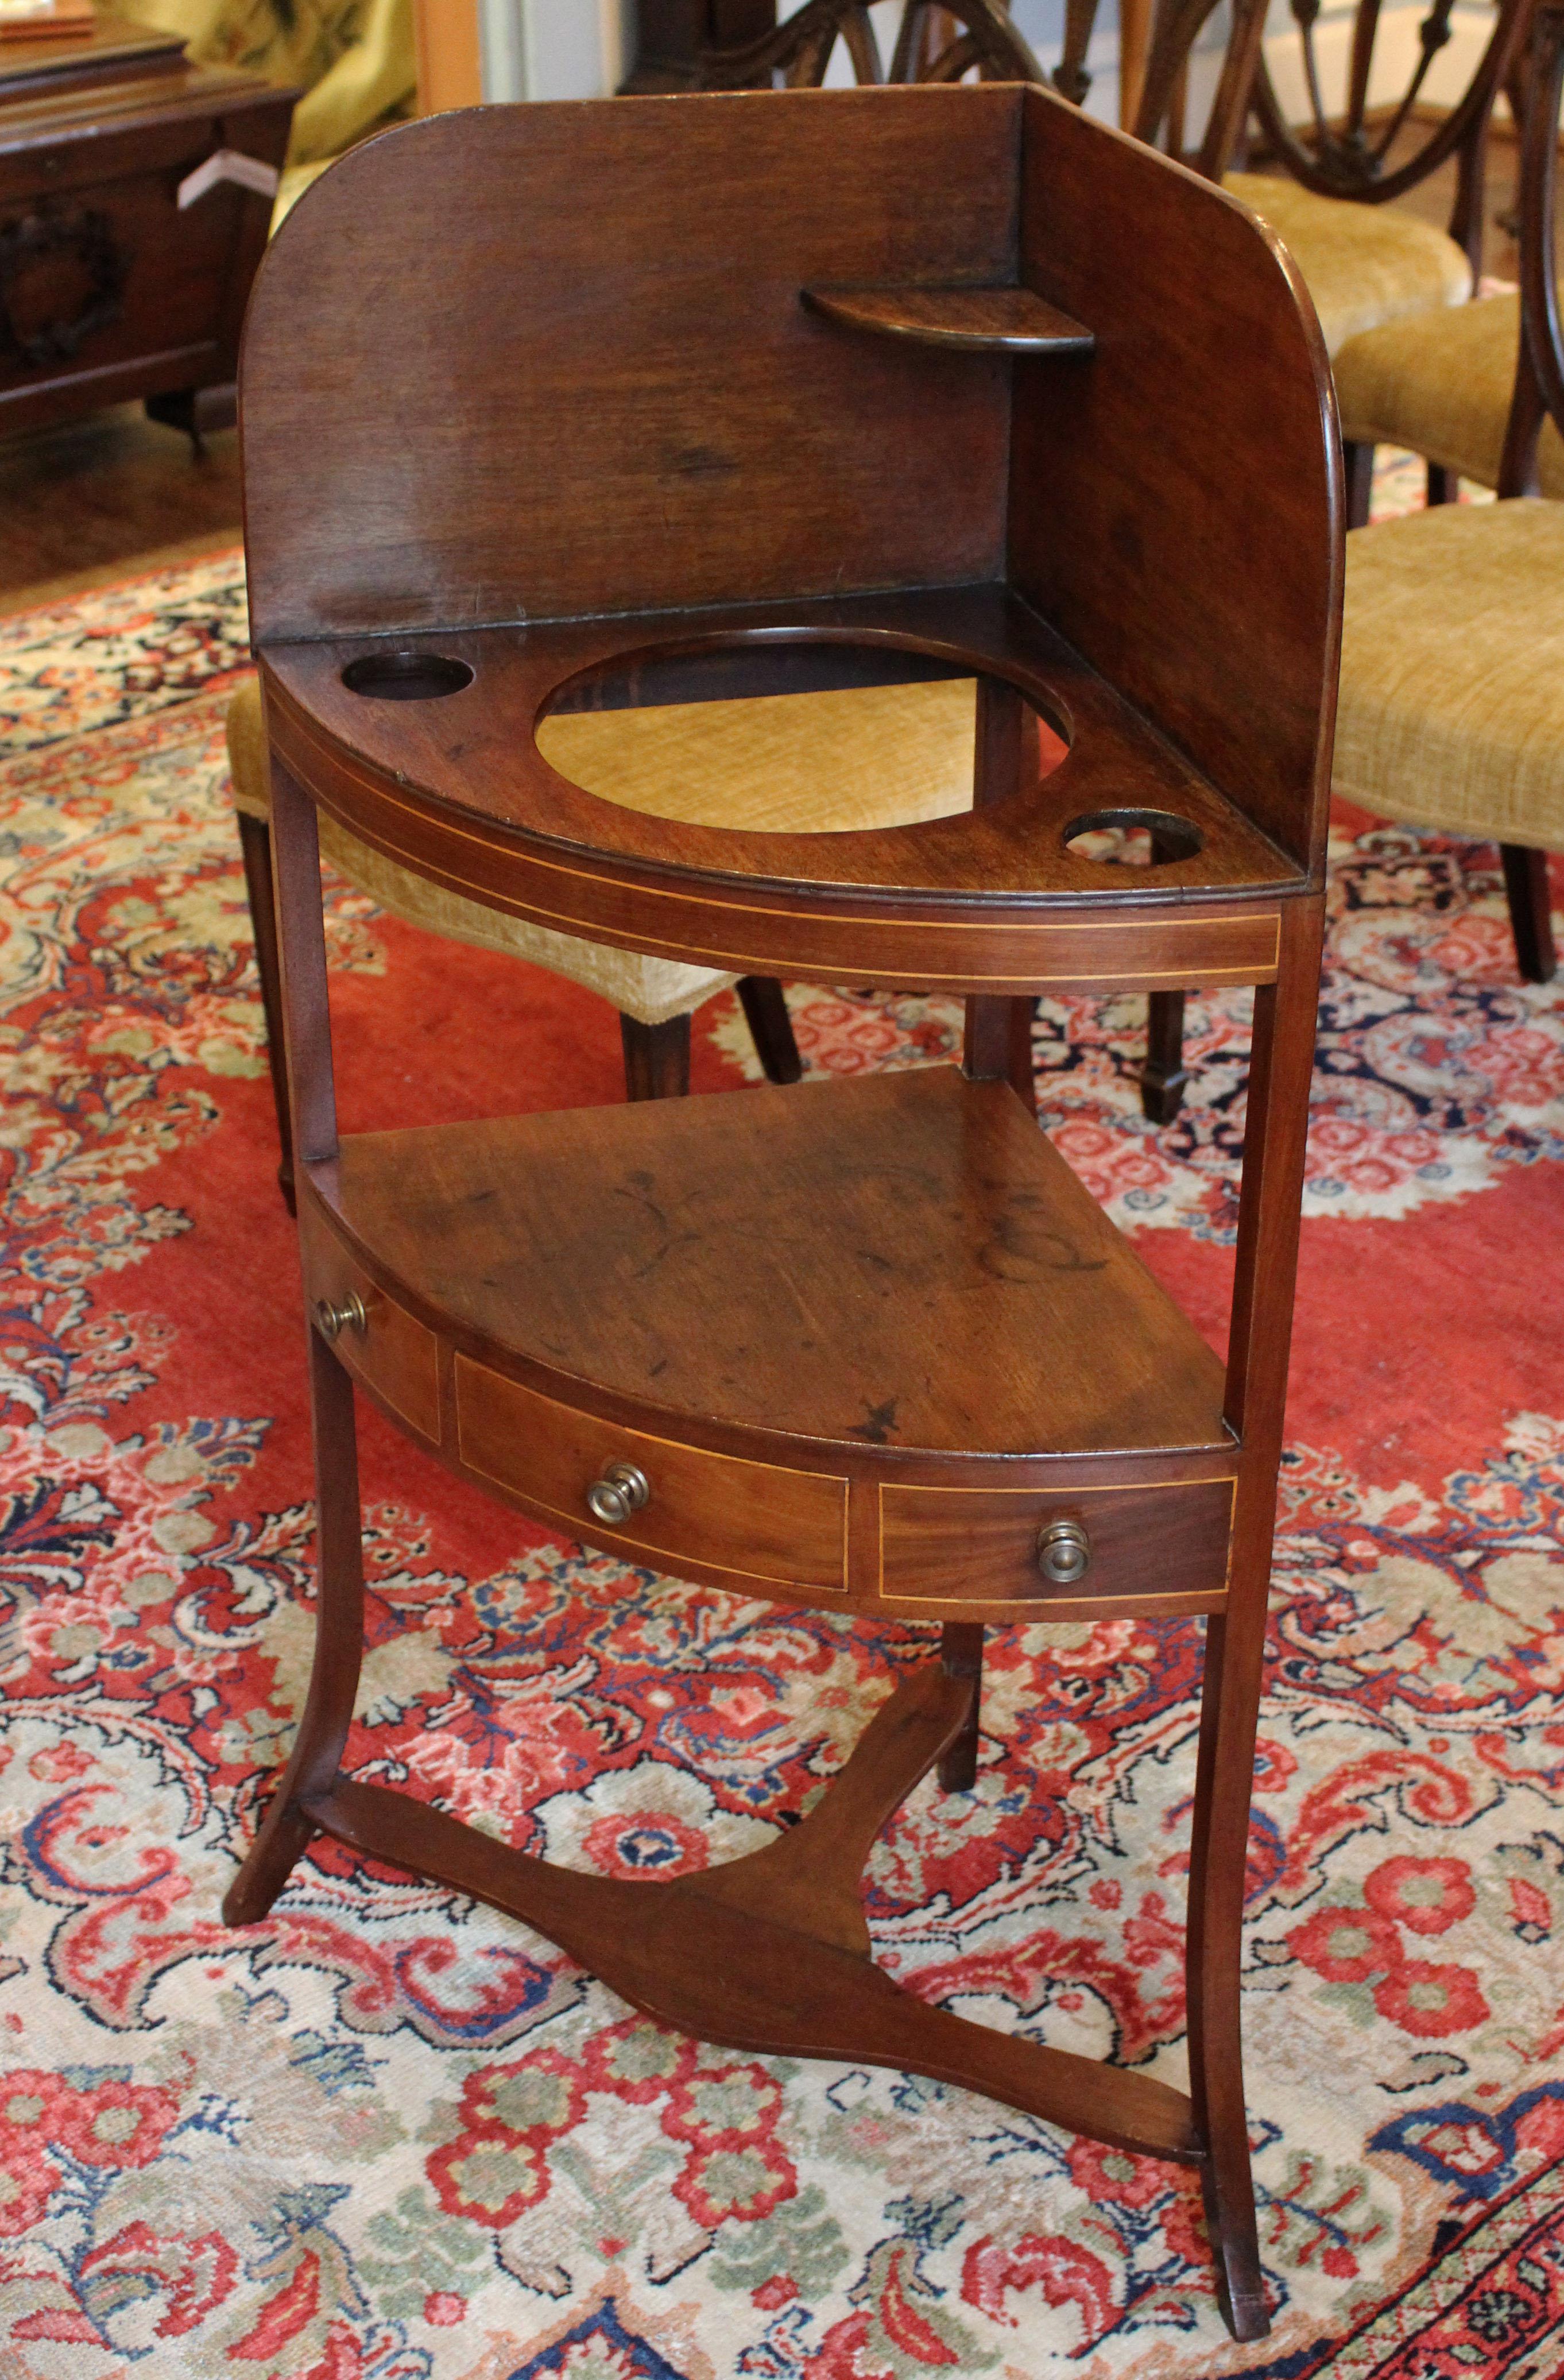 George III corner washstand, mahogany with boxwood inlays. English, c.1800. Raised on delicate, square, flared legs. Replaced pulls. 16